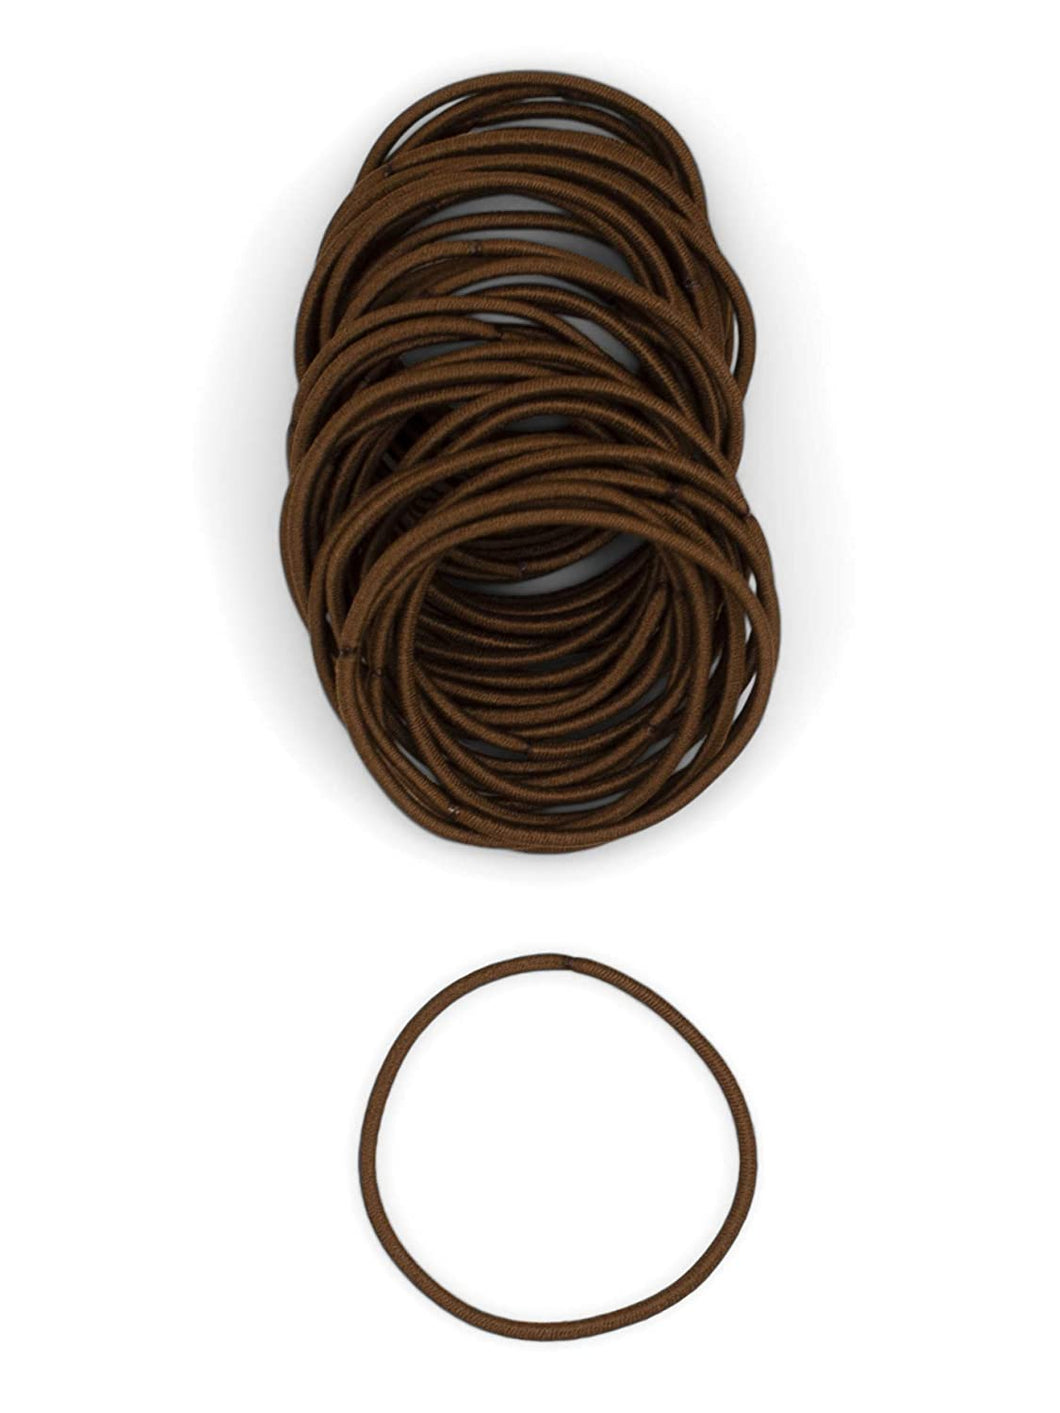 Heliums Medium Brown Thin 2mm Hair Elastics, Color Match Hair Ties for Fine Hair, 1.75 Inch Standard Size - 40 Count